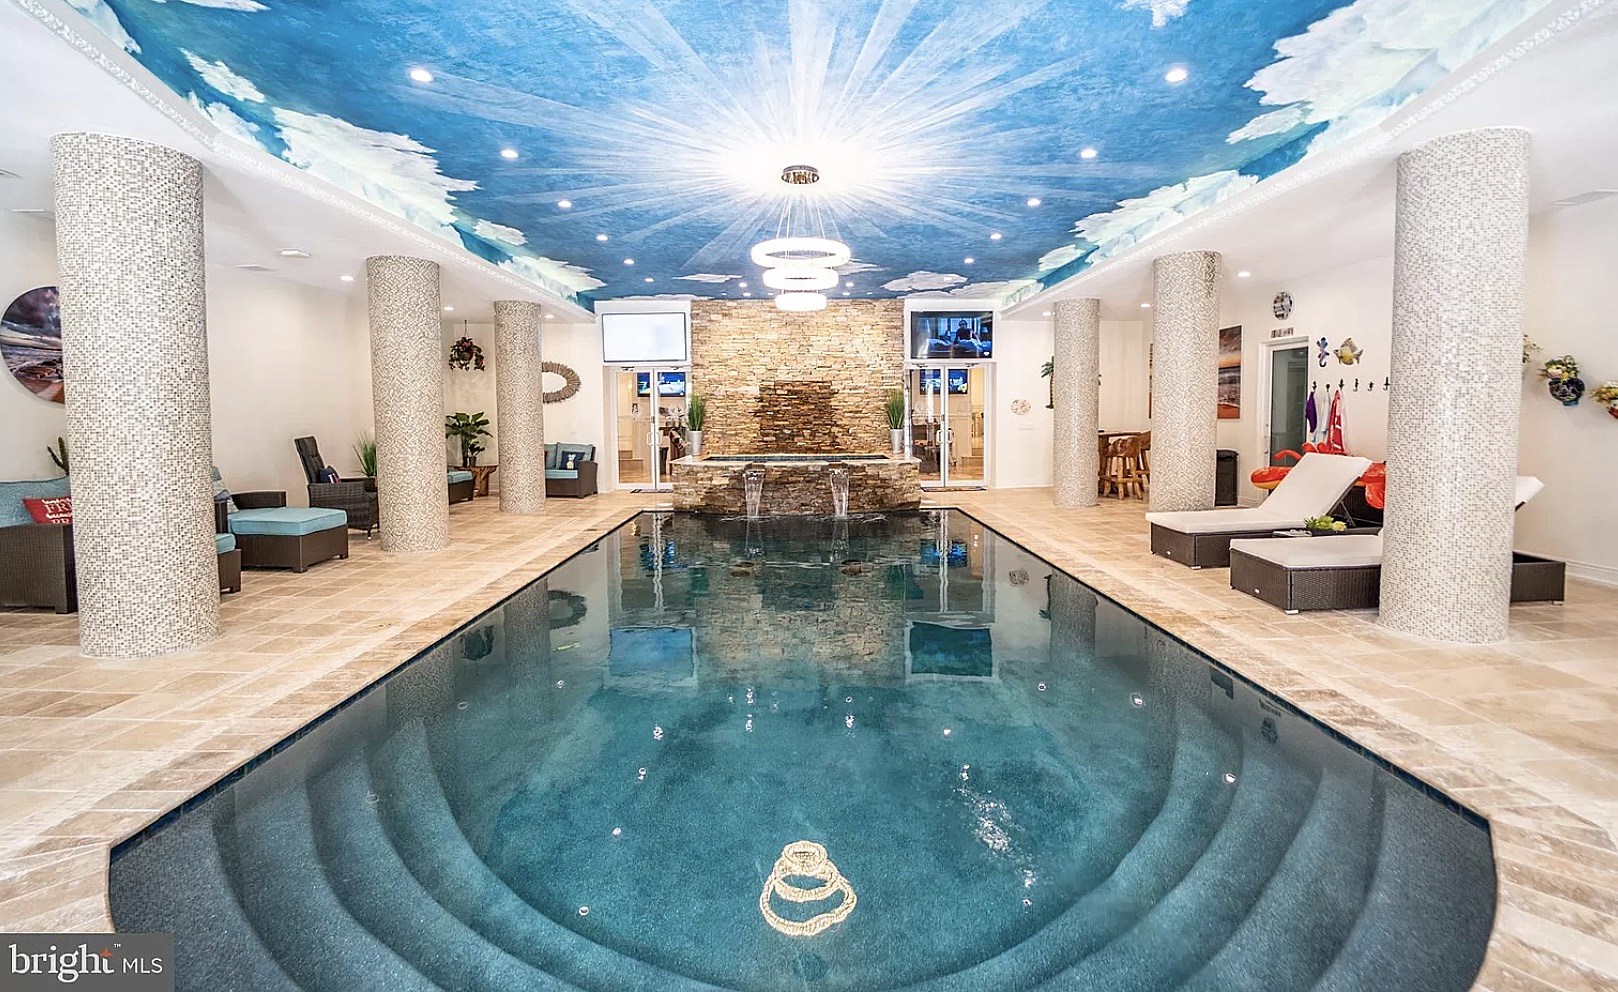 This $14 million mansion in Aurora comes with an indoor pool and